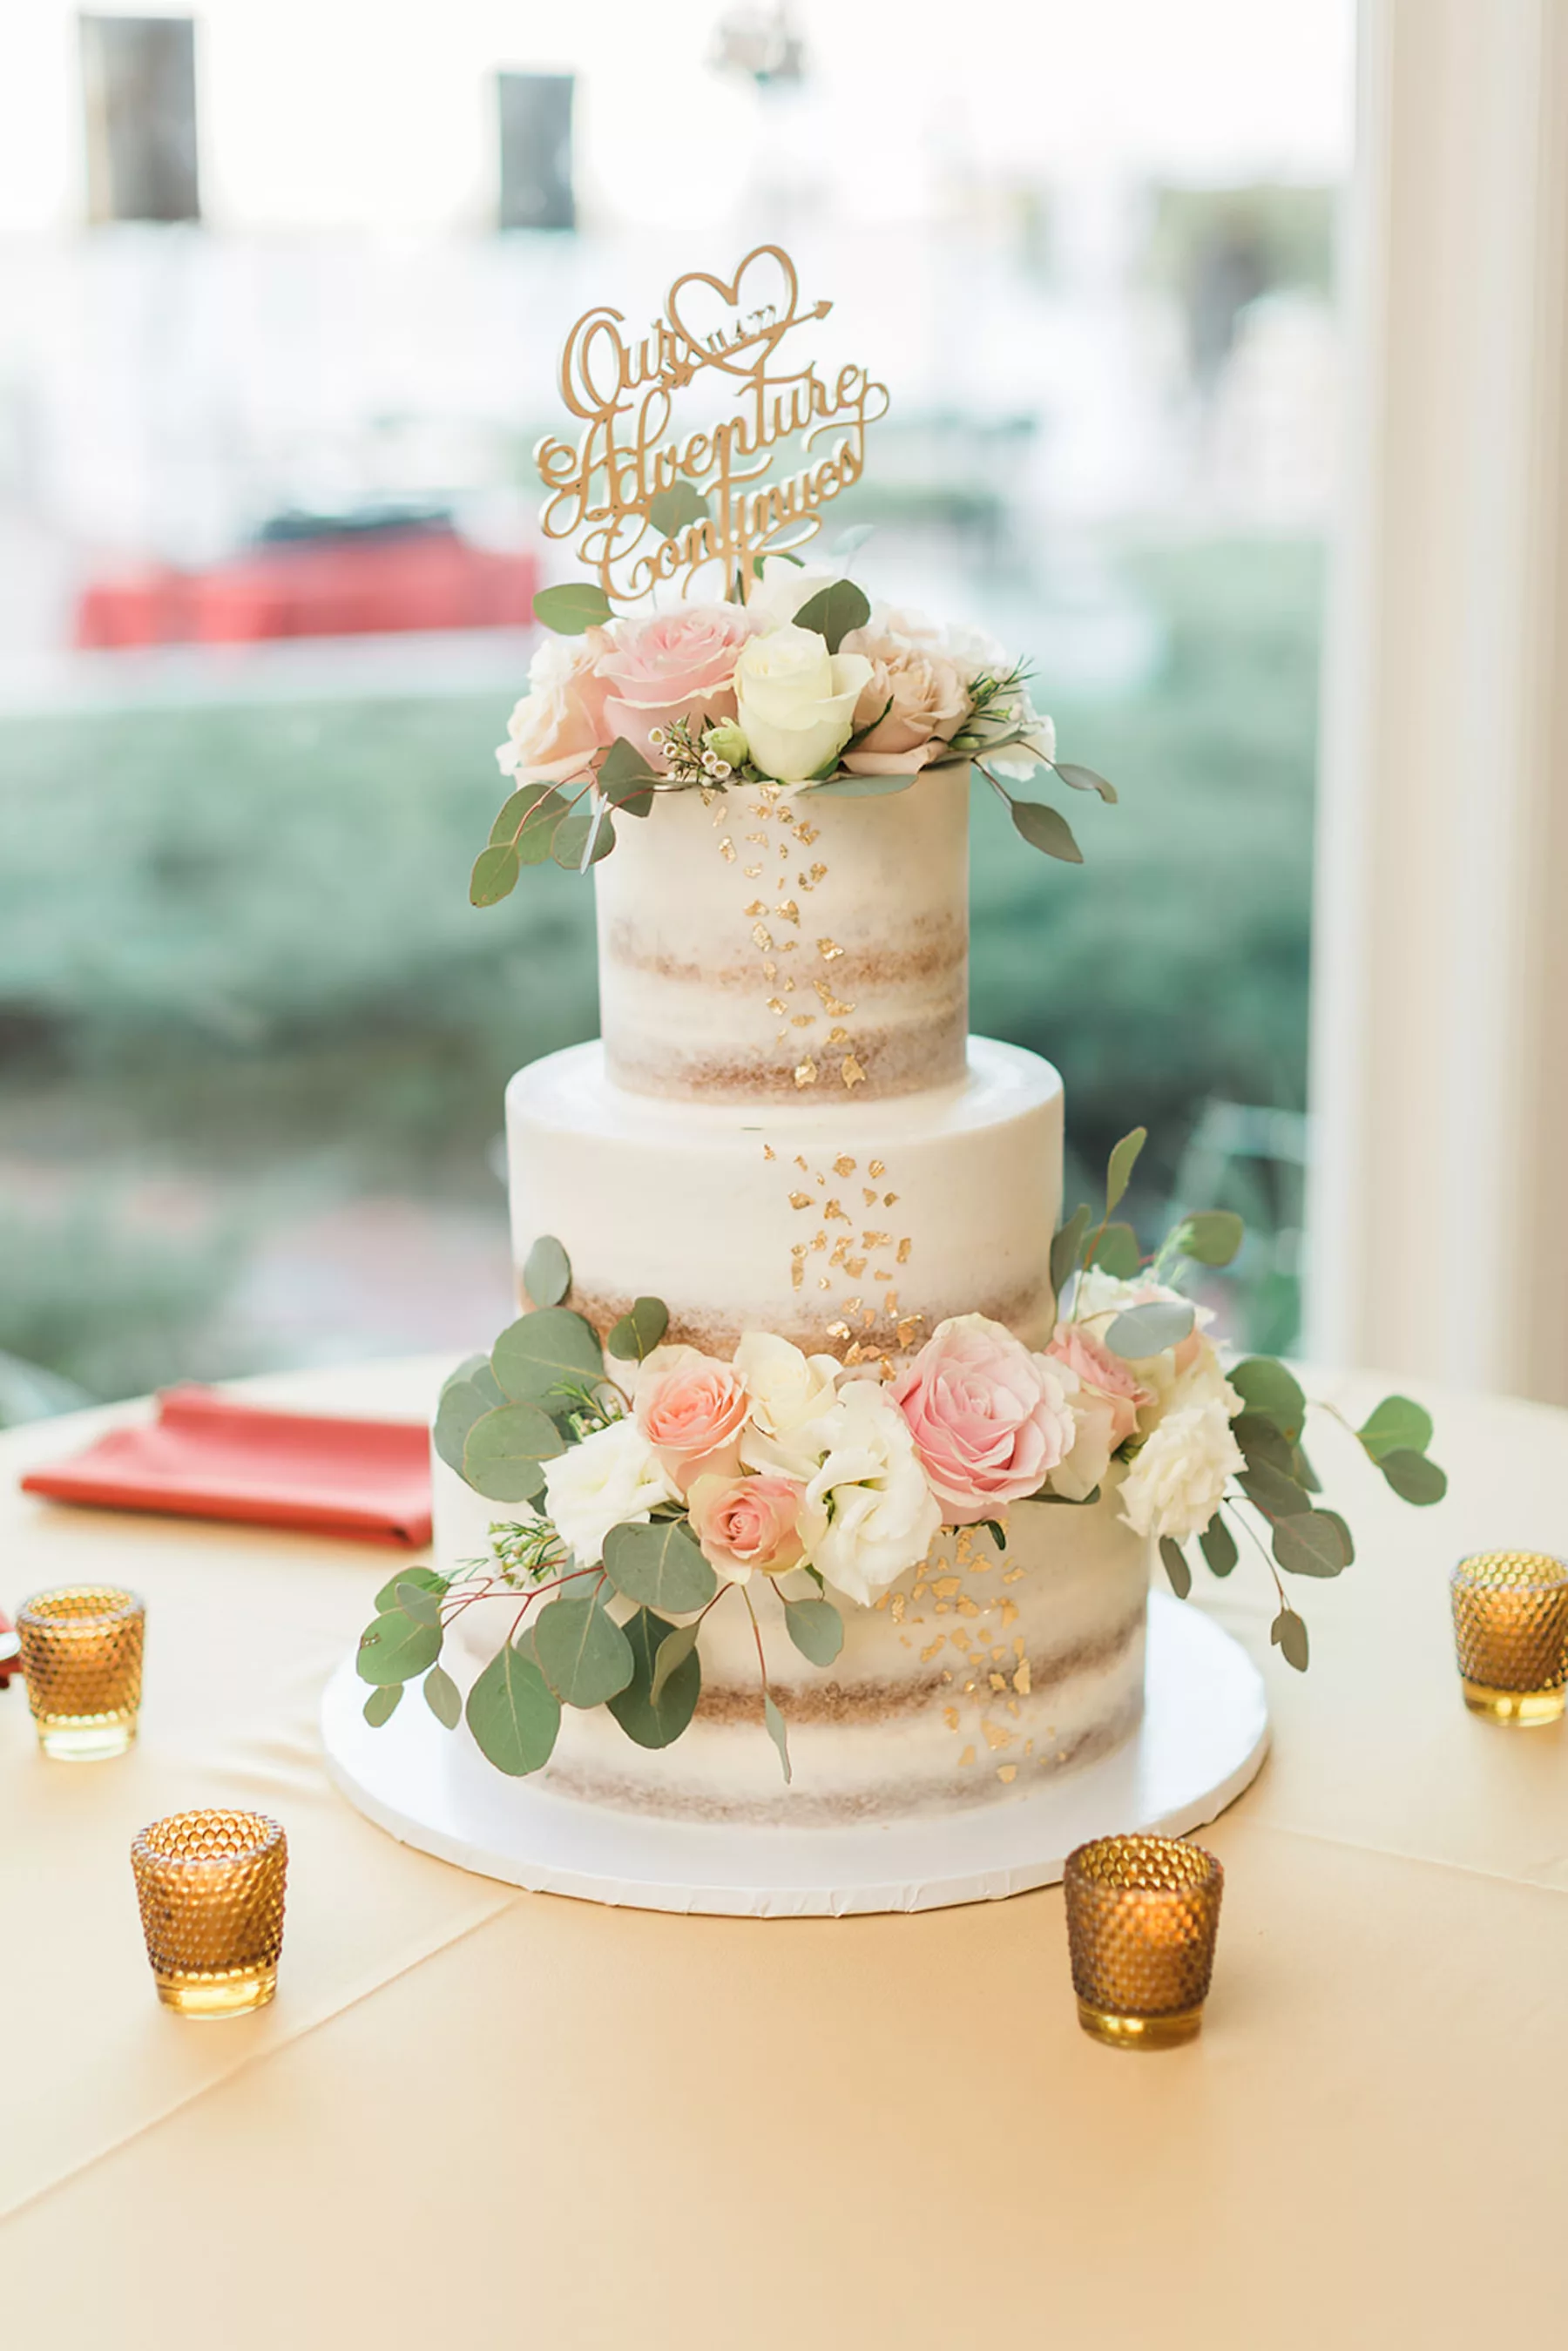 Round Three-Tiered Semi-Naked Wedding Cake with Gold Foil, Pink and White Roses, Gardenias, and Eucalyptus Greenery Accents Inspiration